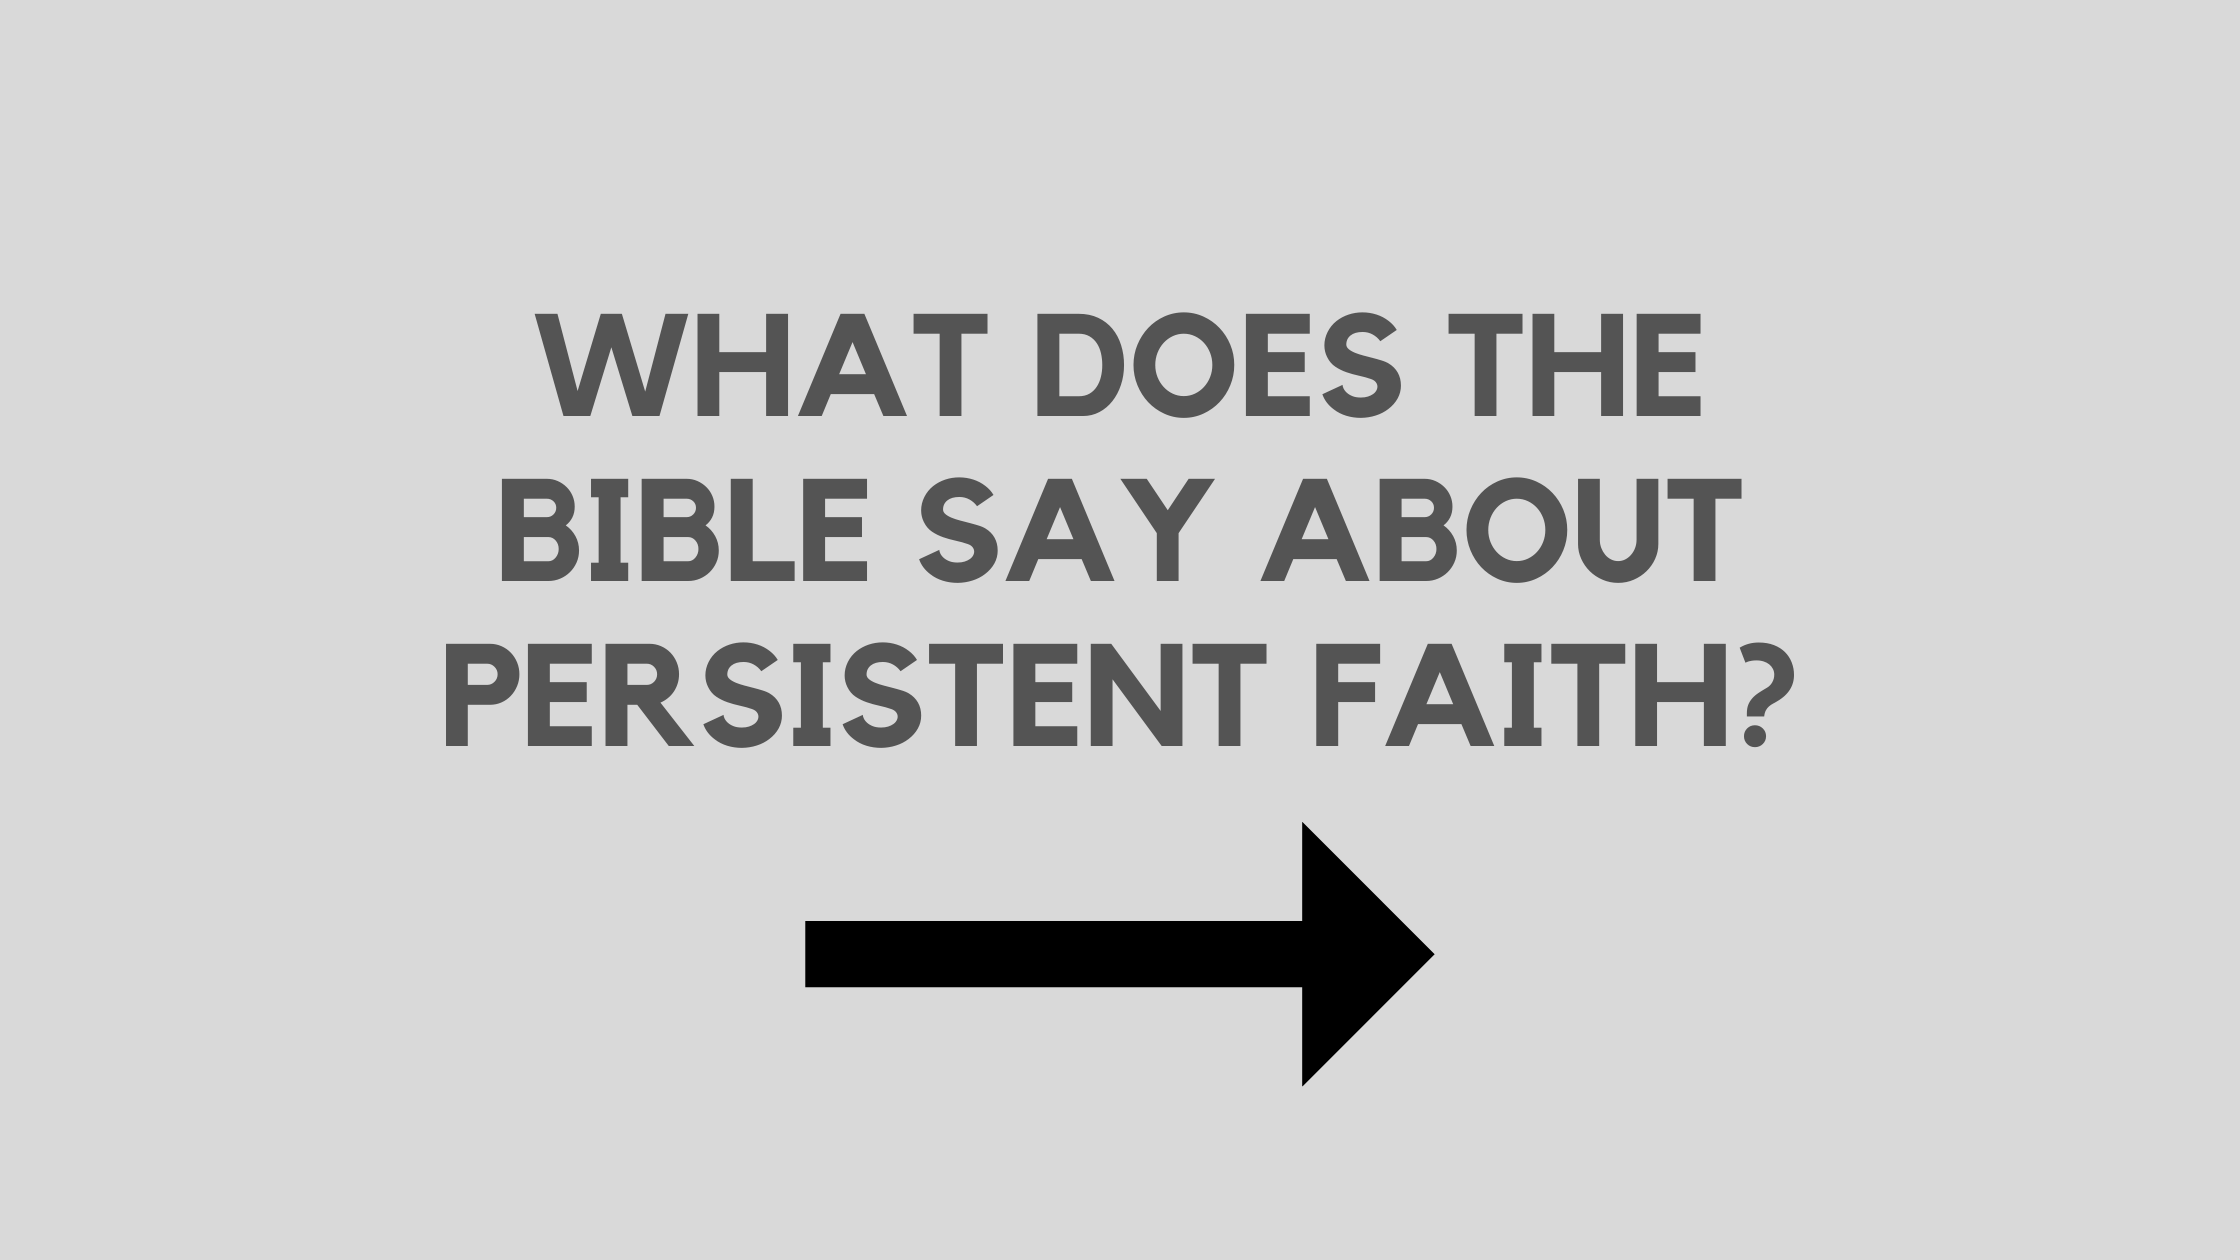 What Does the Bible Say About Persistent Faith